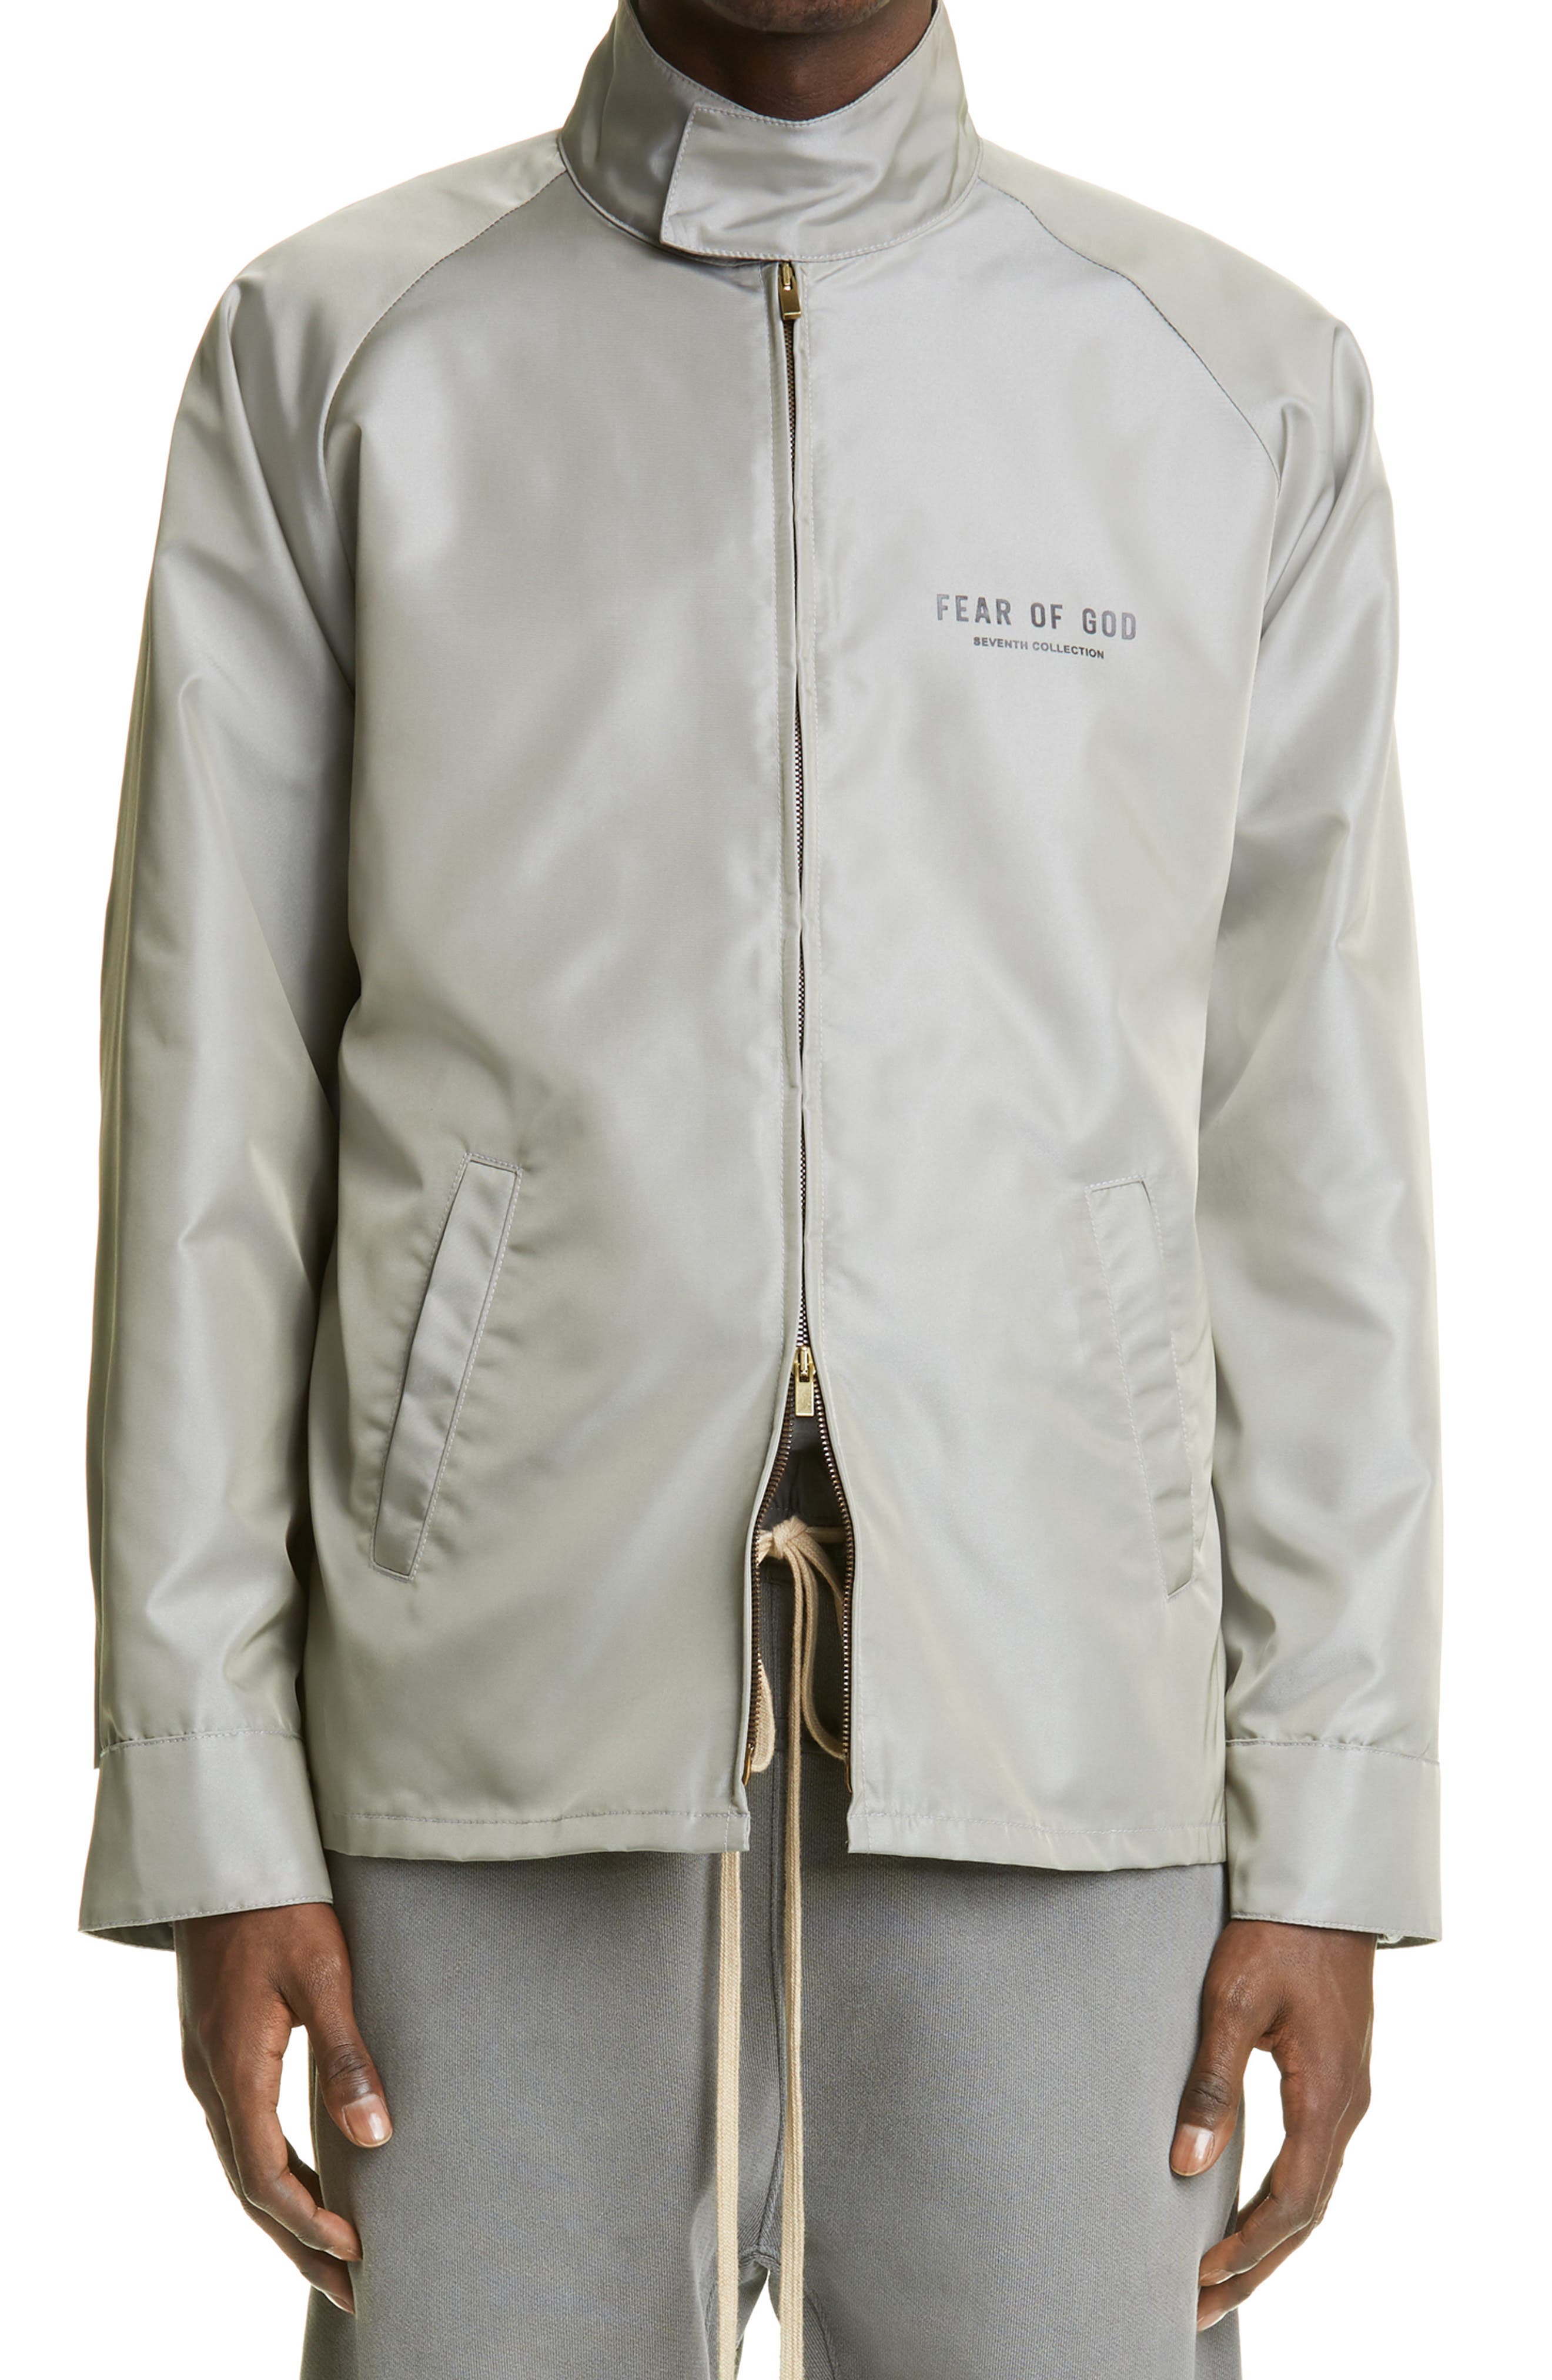 Fear of God Souvenir Logo Jacket in Grey Iridescent at Nordstrom, Size Small